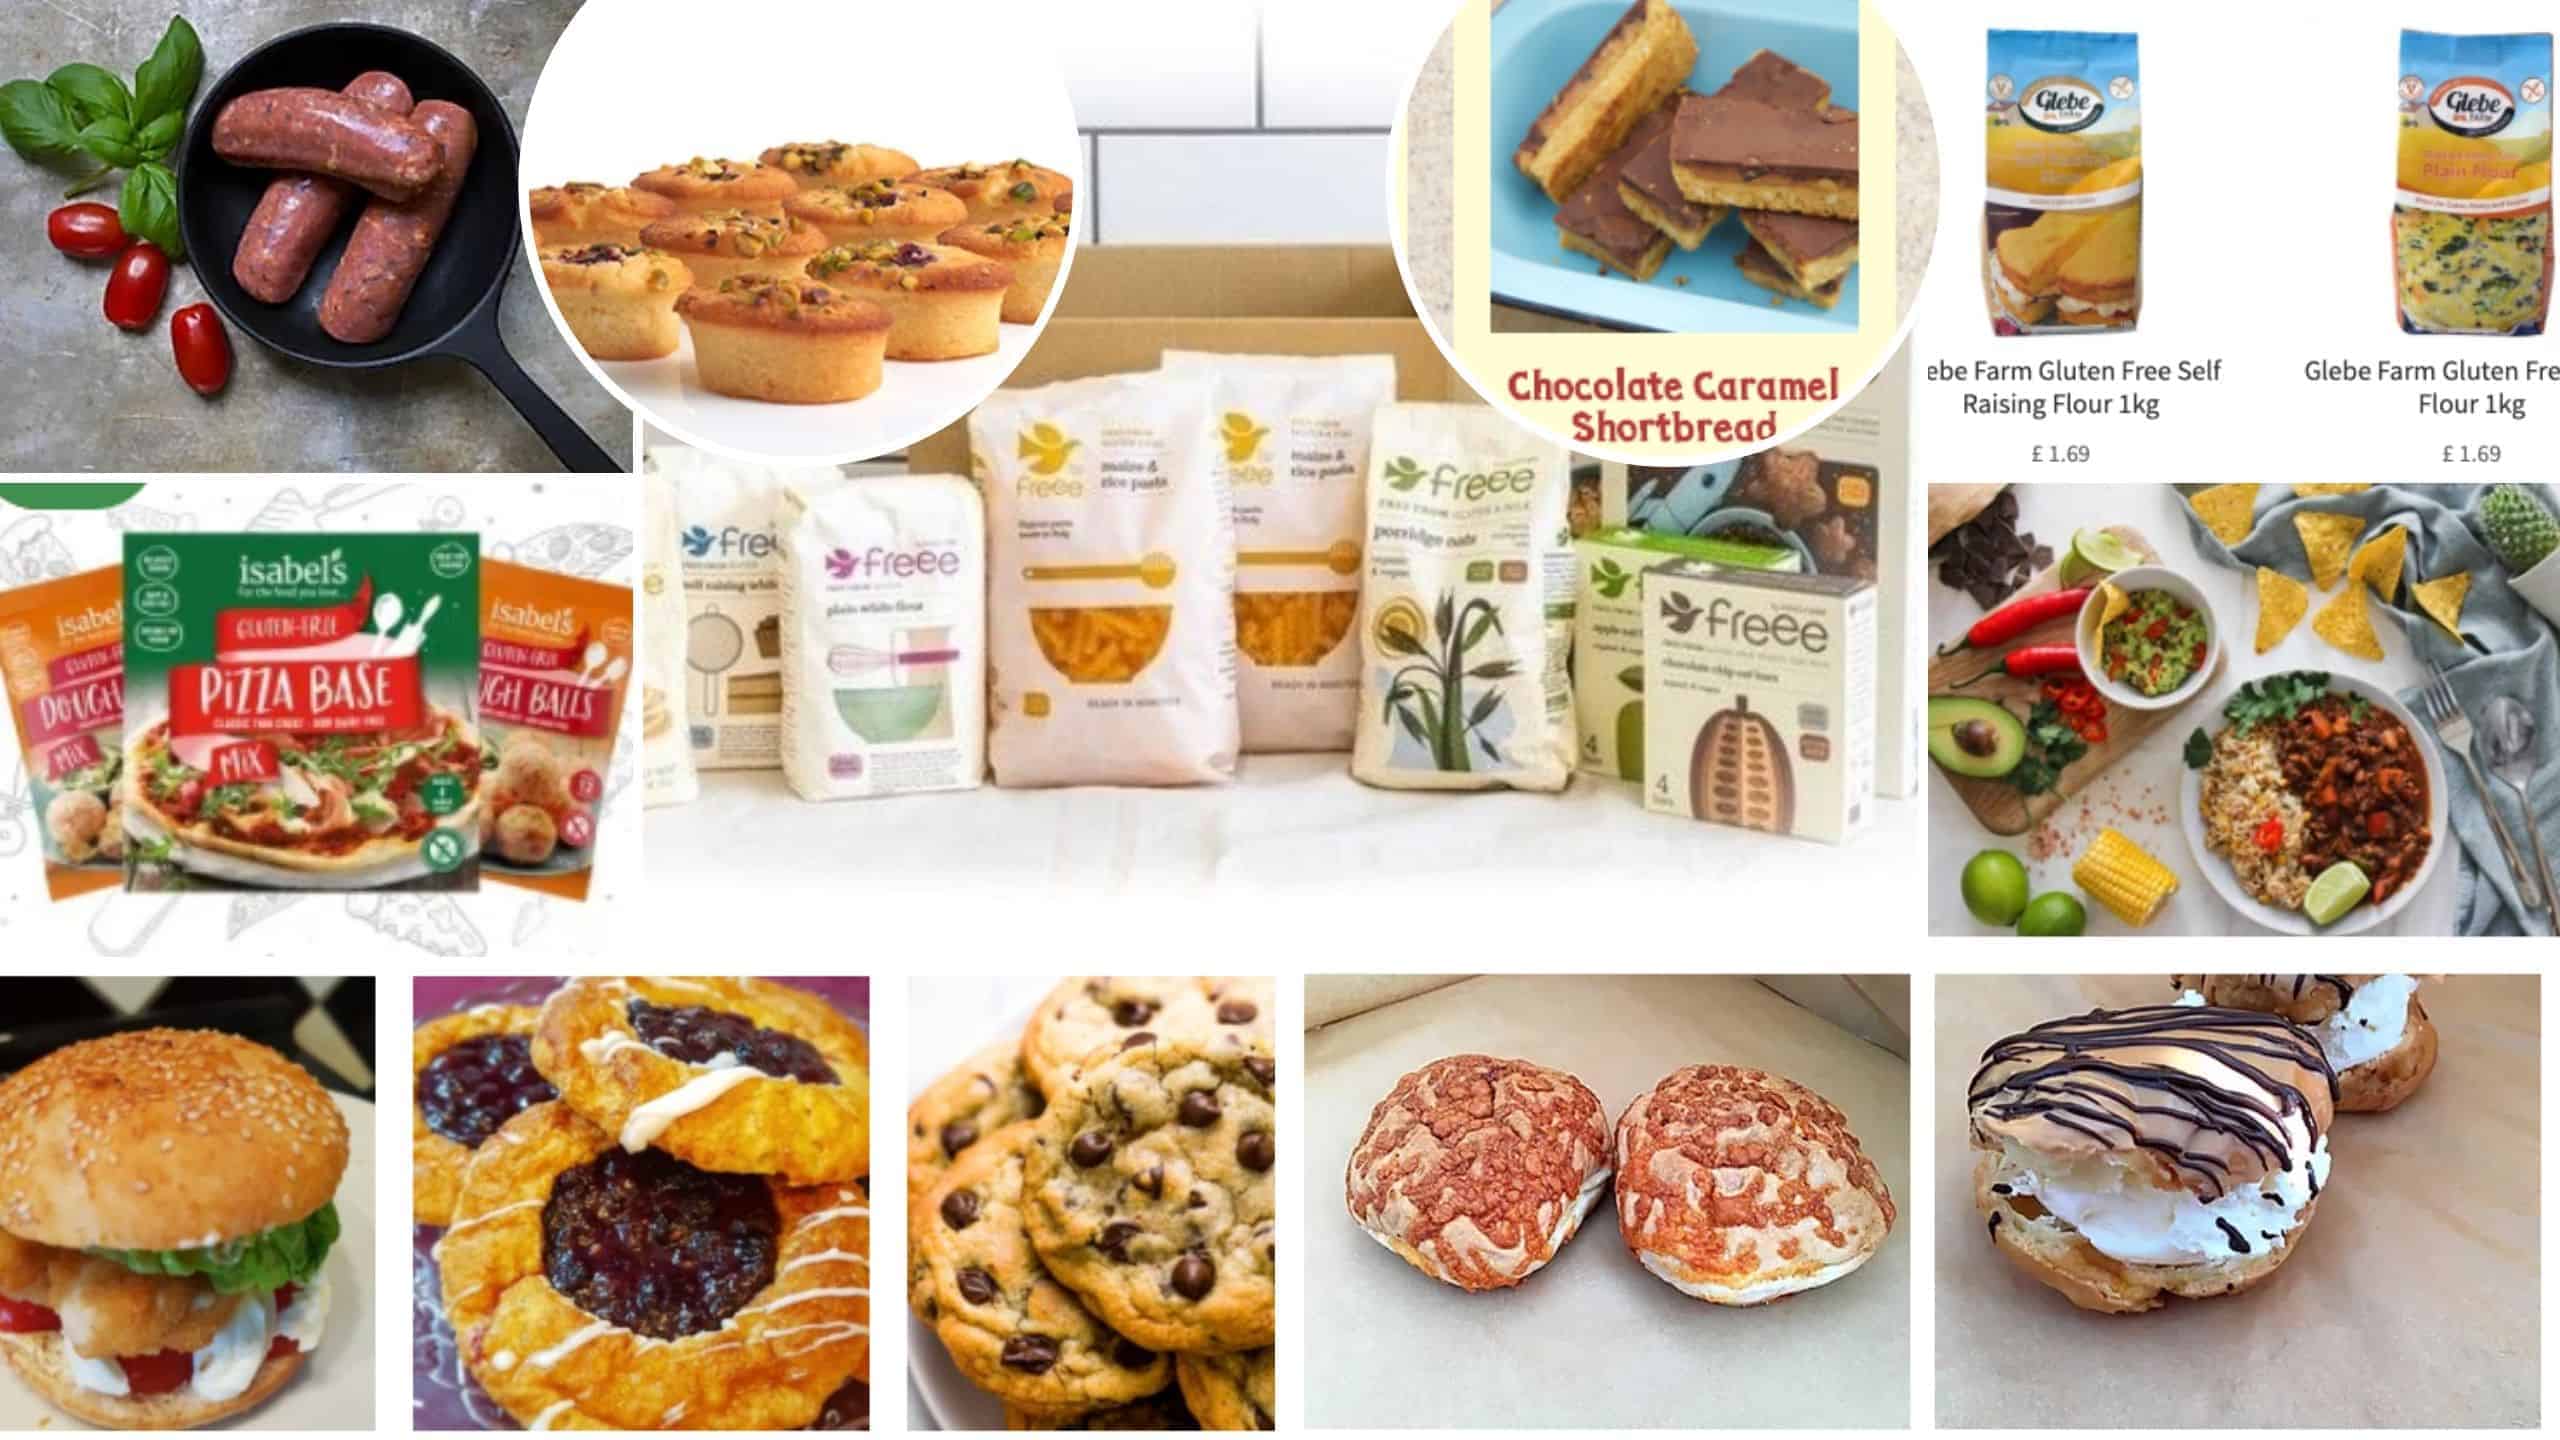 Where can you buy gluten free food online in the UK? - The Gluten Free